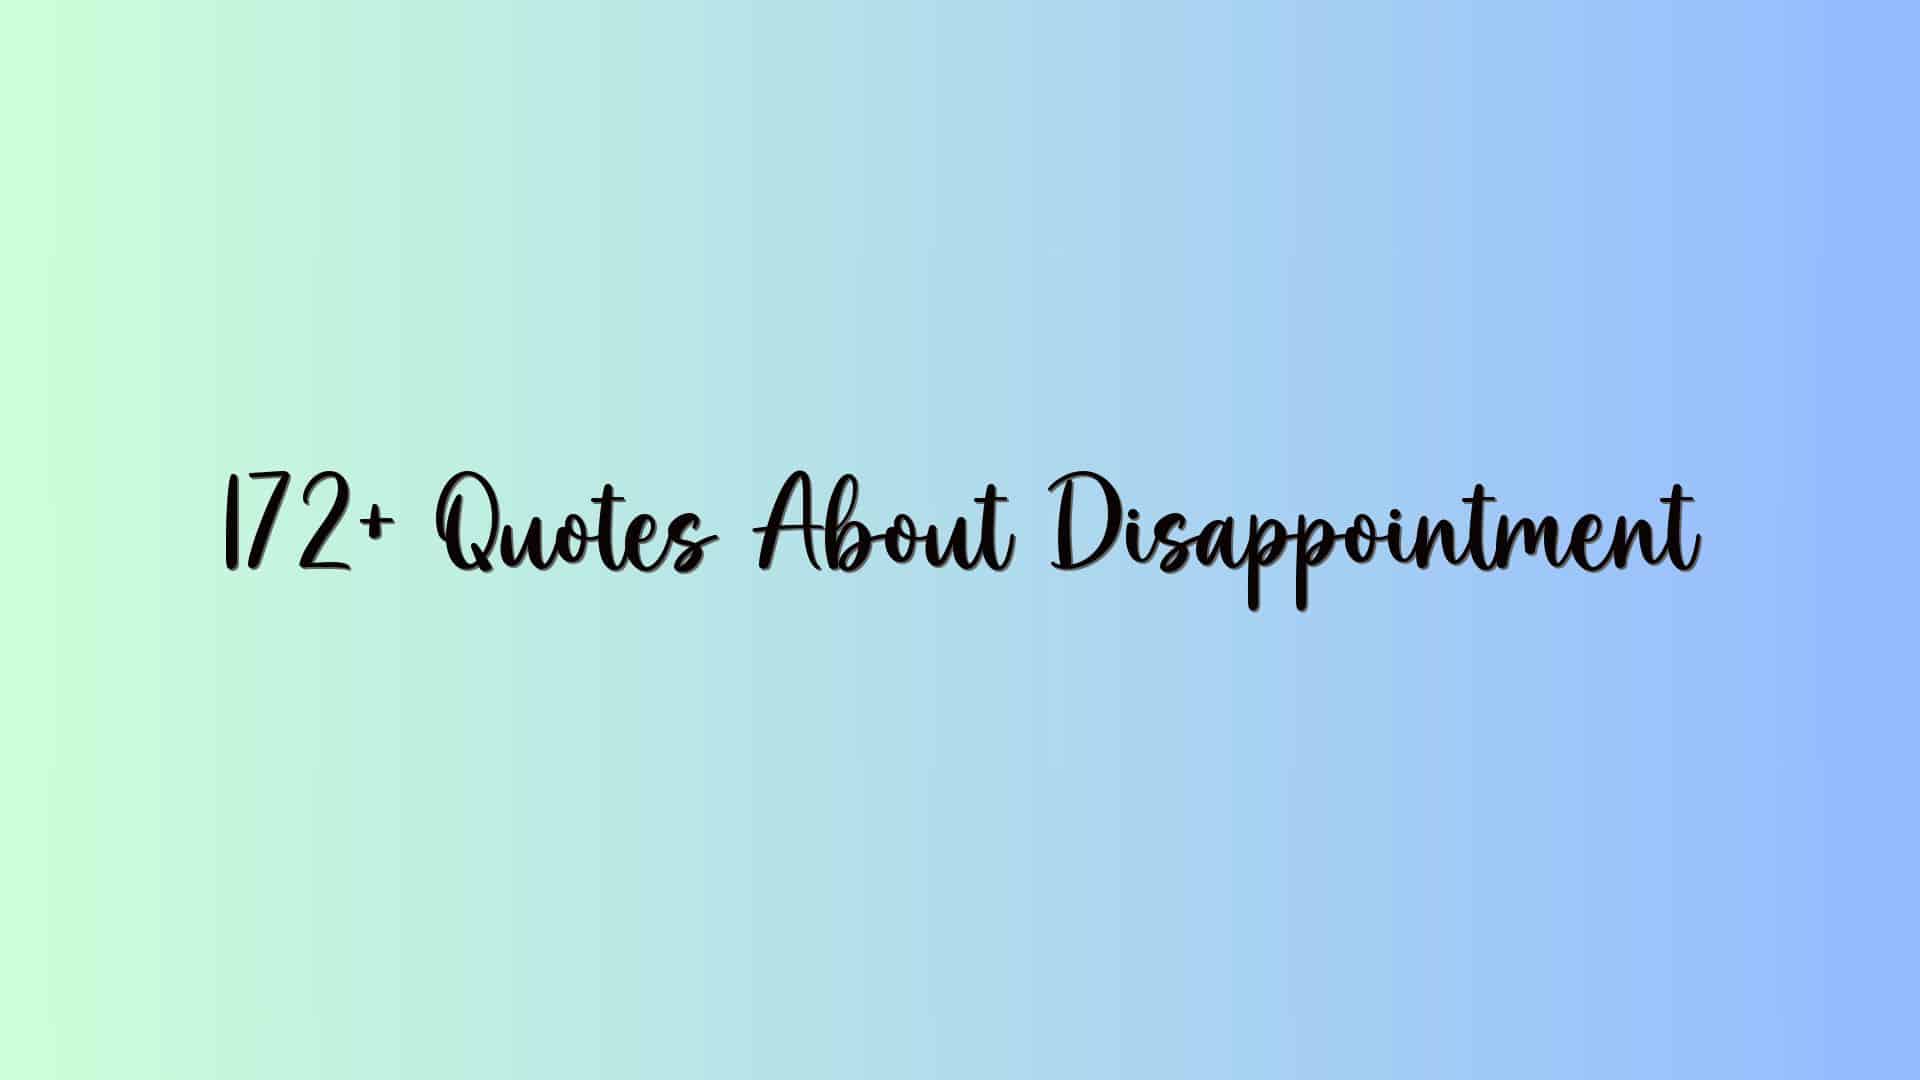 172+ Quotes About Disappointment